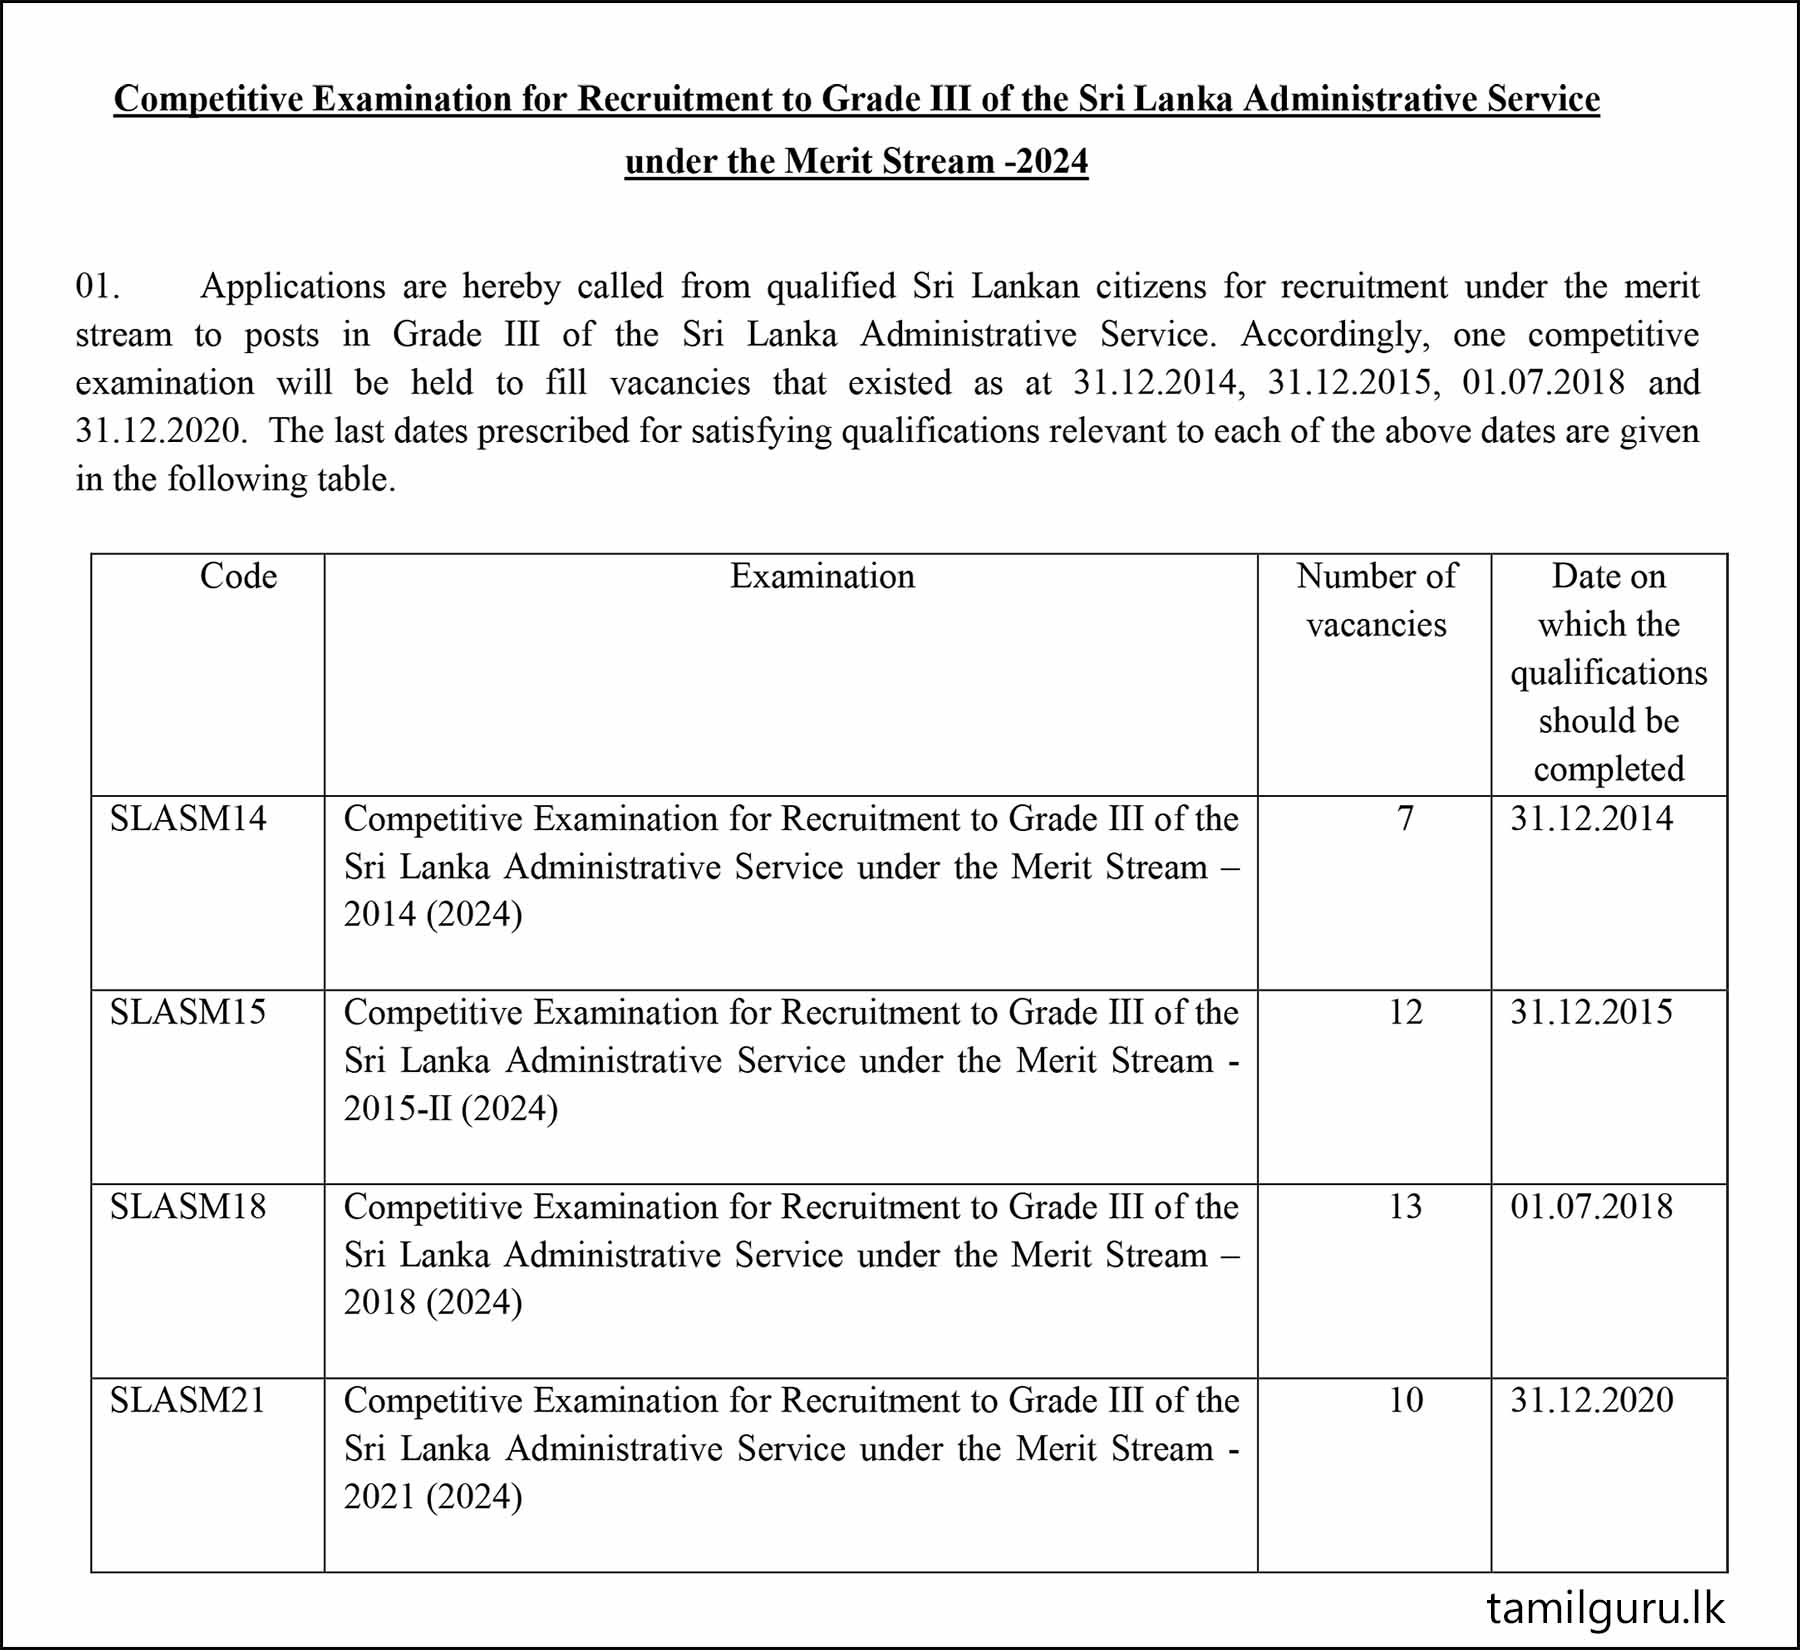 Calling for Applications - Competitive Examination for Recruitment to Grade III of the Sri Lanka Administrative Service (SLAS) under the Merit Stream - 2024